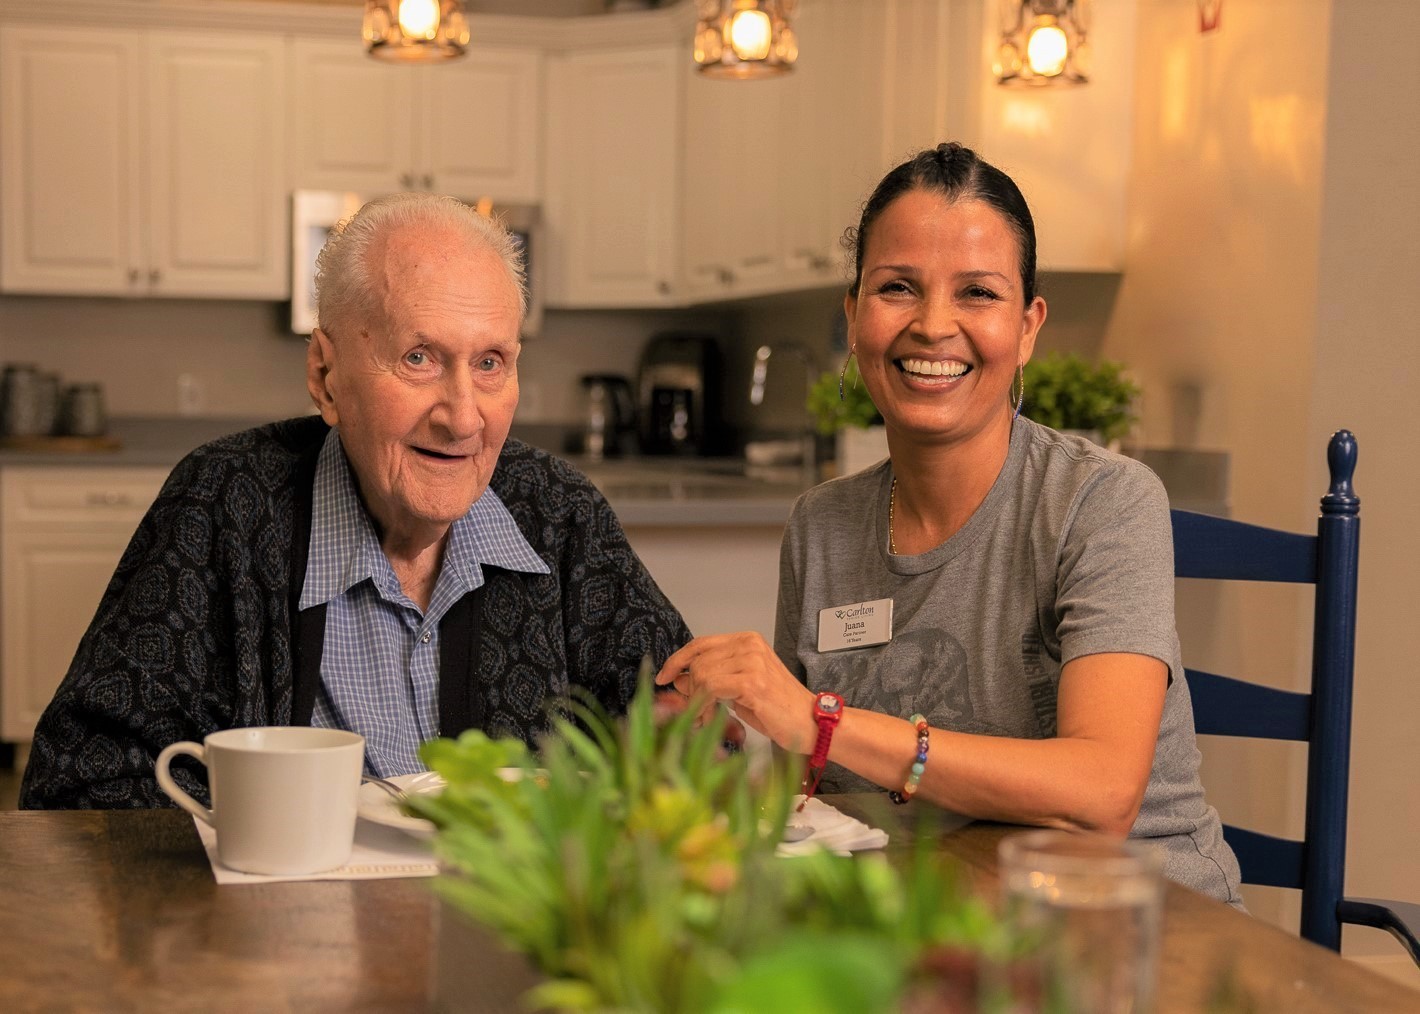 We believe happy employees make happy residents, we take pride in recruiting people who embrace our “culture of caring.”